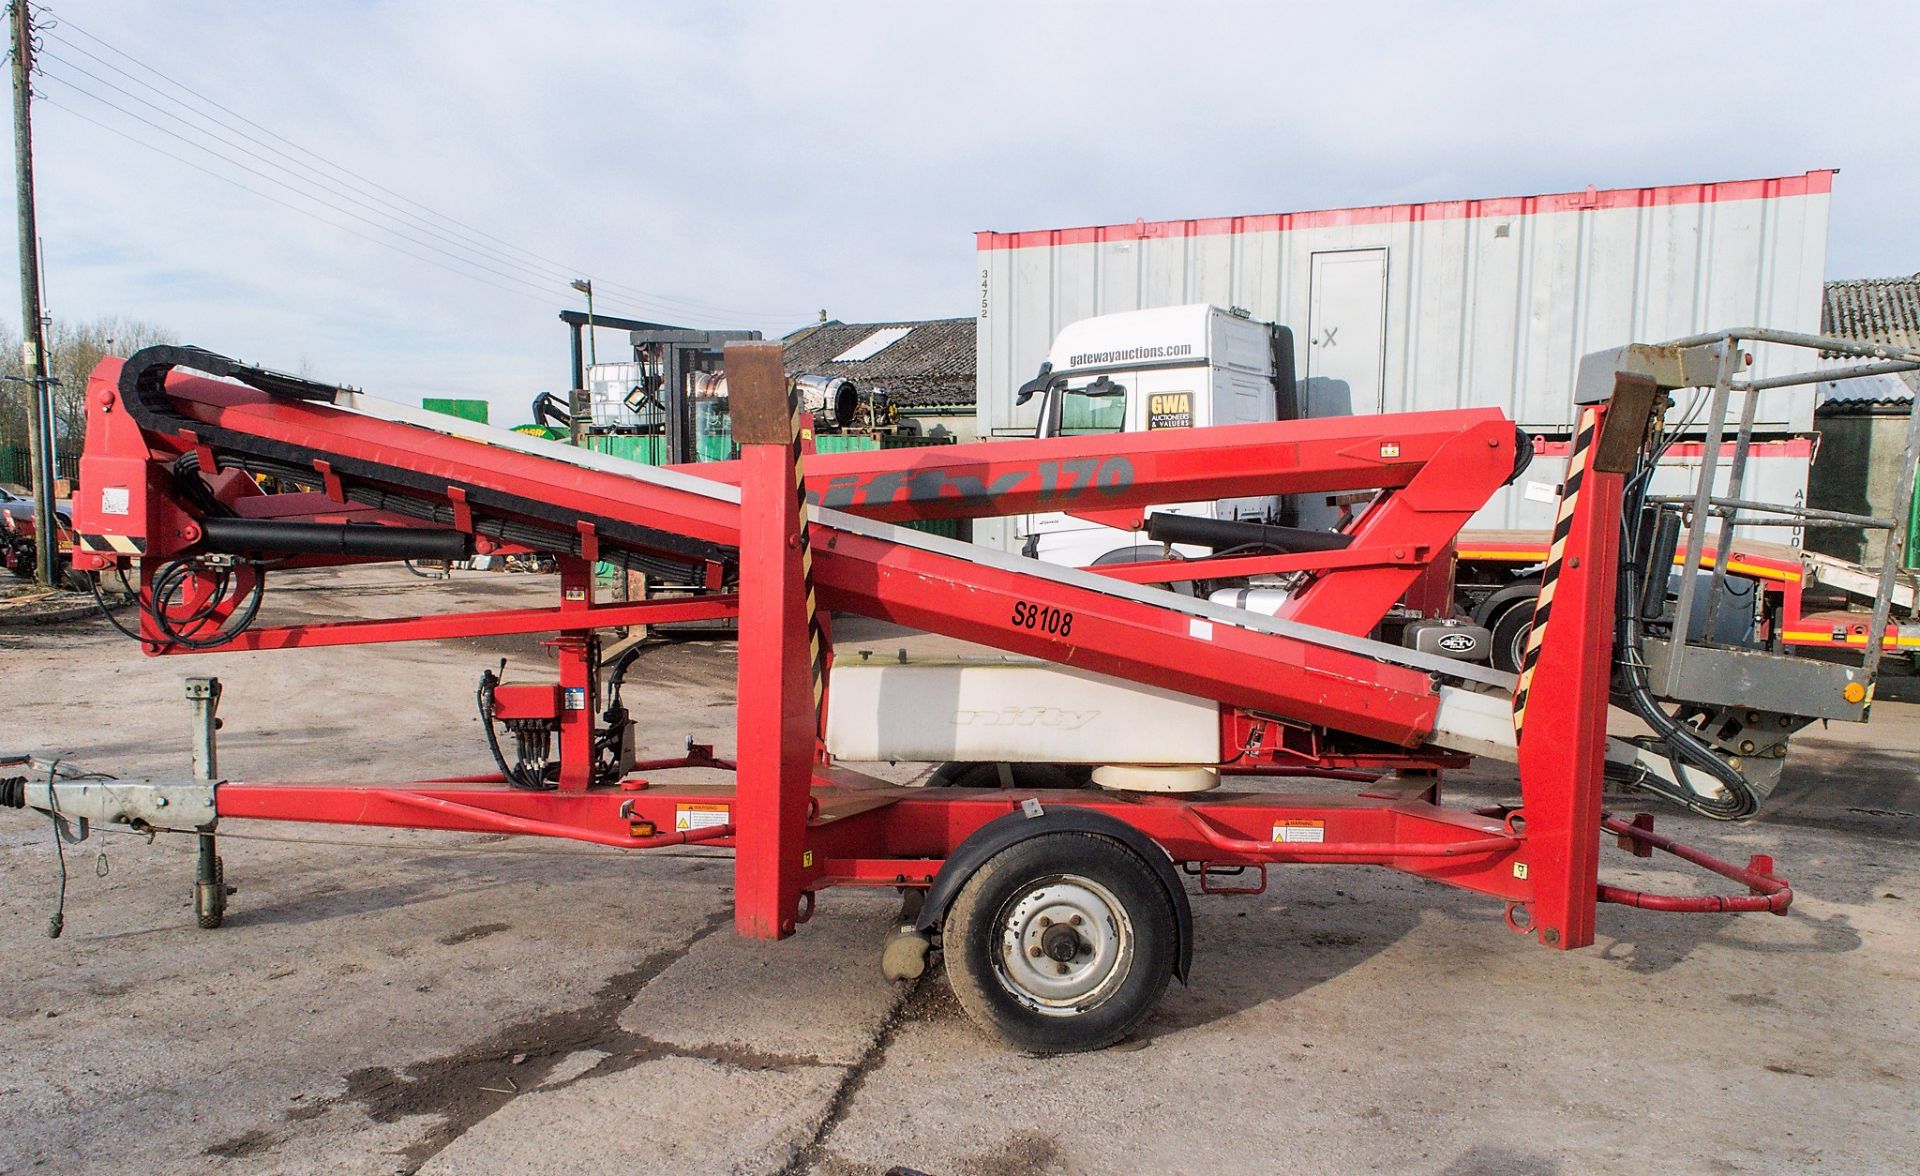 Nifty 170 HDET battery electric/diesel fast tow articulated boom lift Year: 2012 S/N: 24835 S8108 - Image 6 of 12